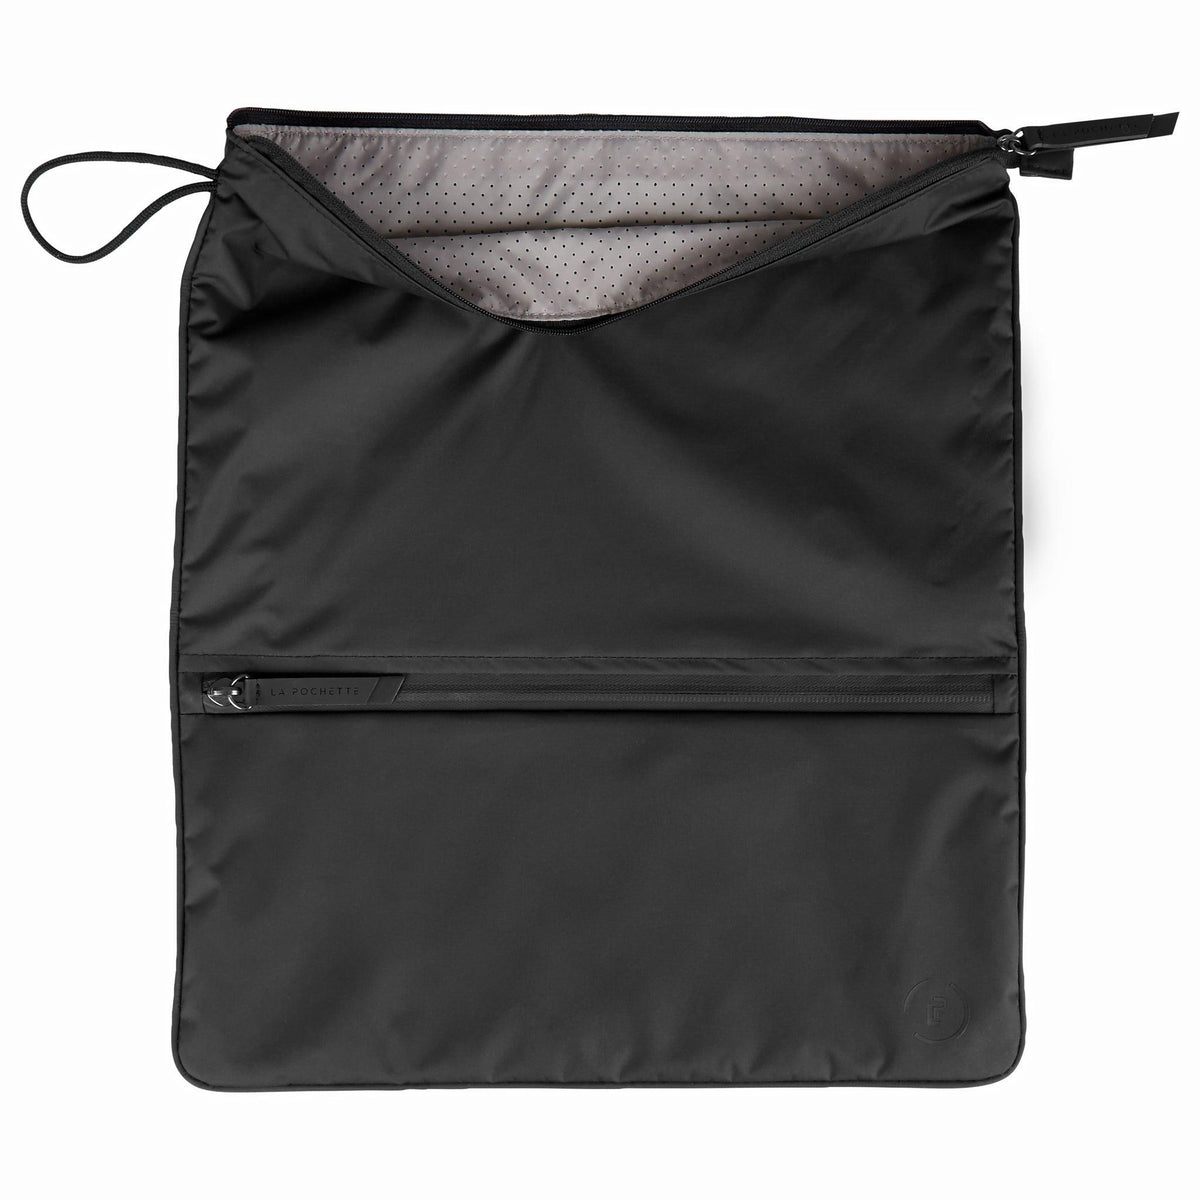 Ink Sweat Bag lying flat, showing unzipped top to reveal inner perforated grey lining